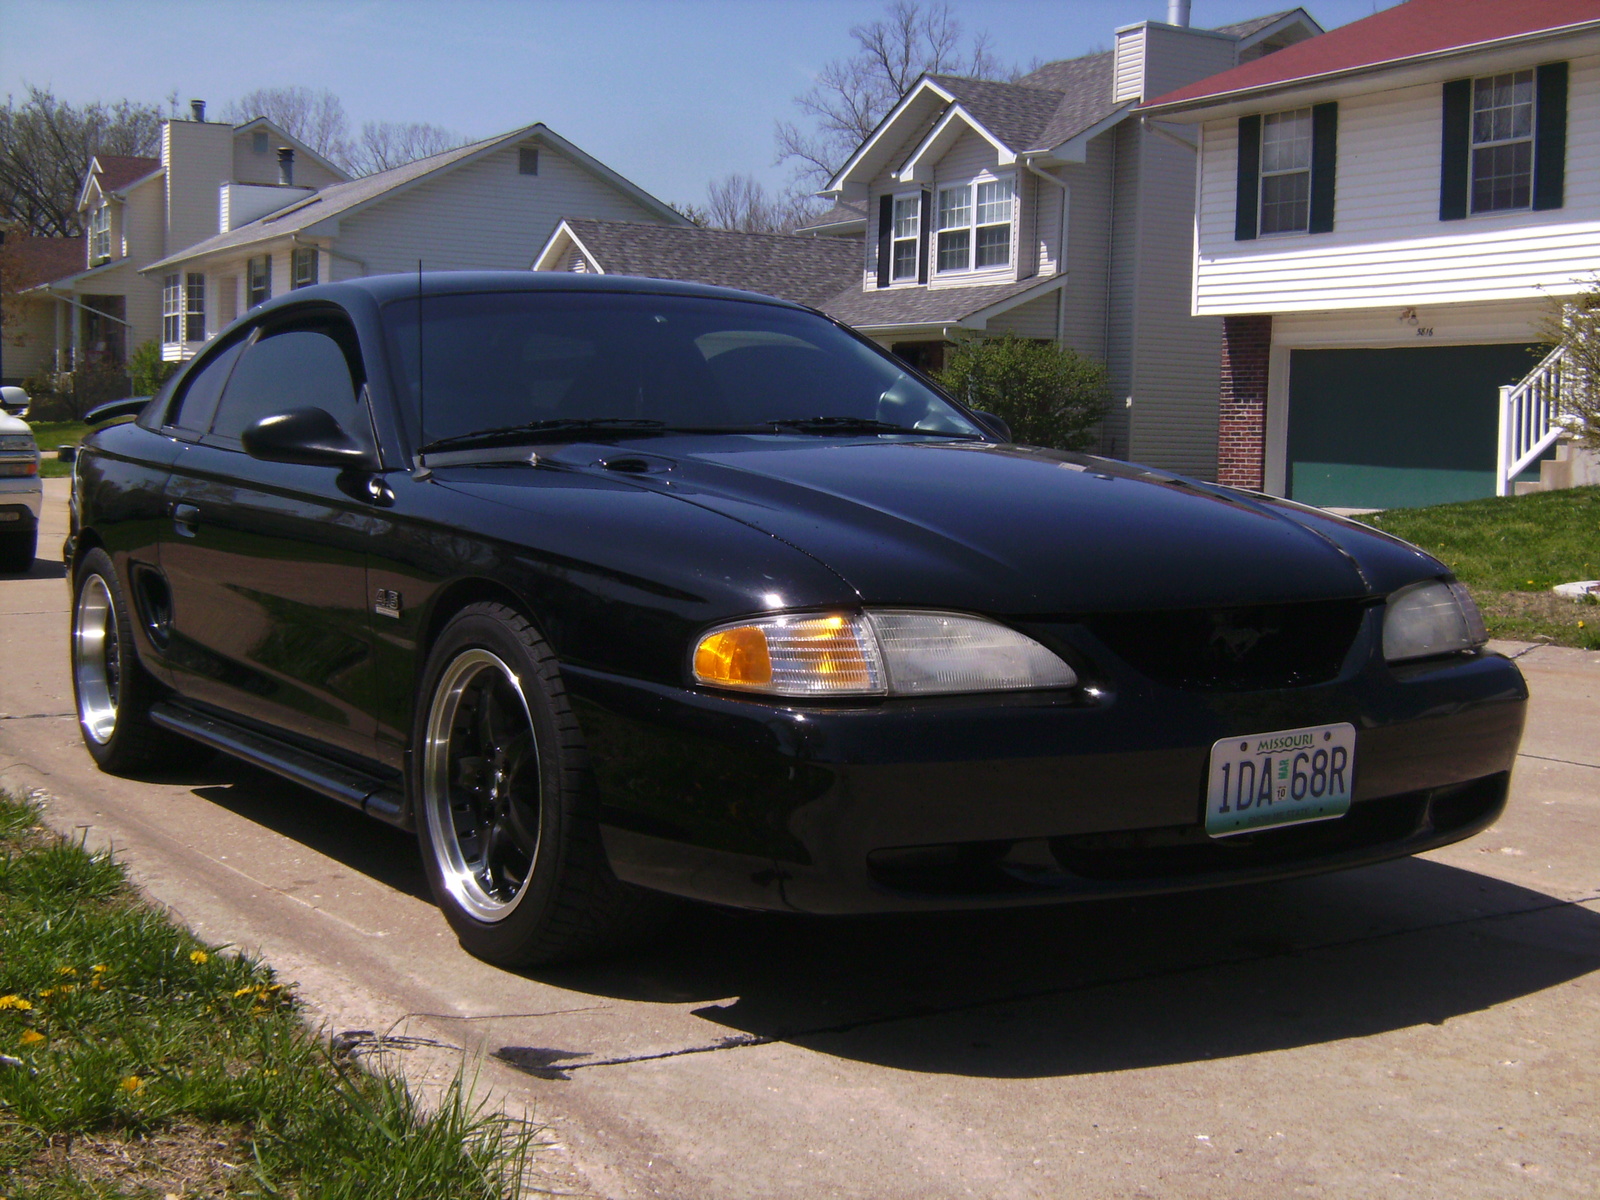 1998 Ford mustang coupe reviews #7